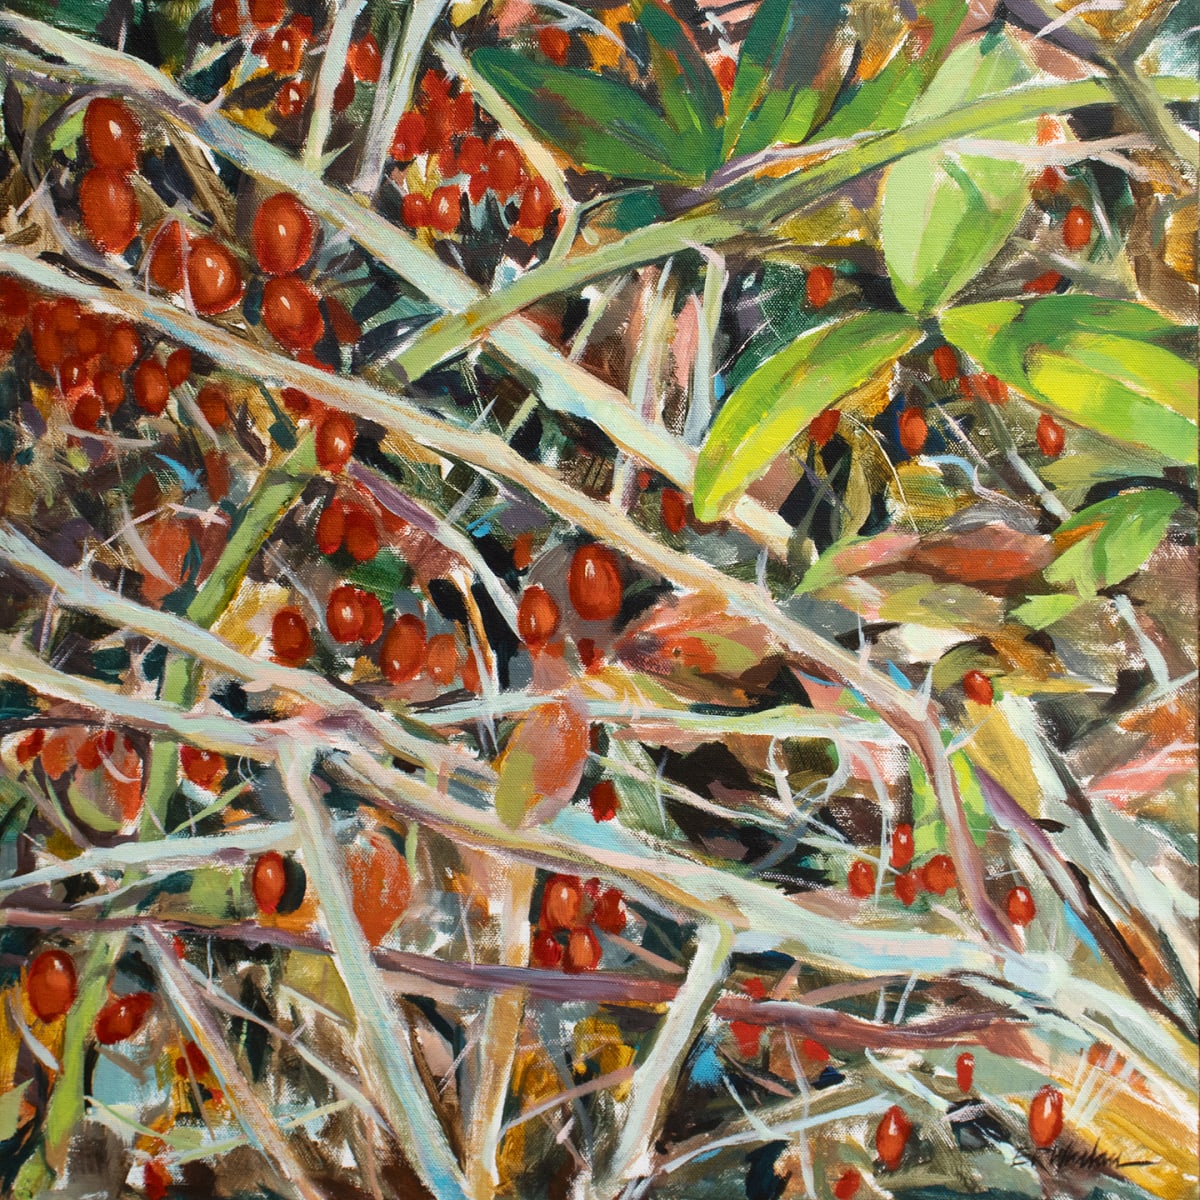 Red Berries by Elizabeth R. Whelan  Image: An abstracted tangle of red berries in autumn creates a visual delight in this landscape botanical painting.